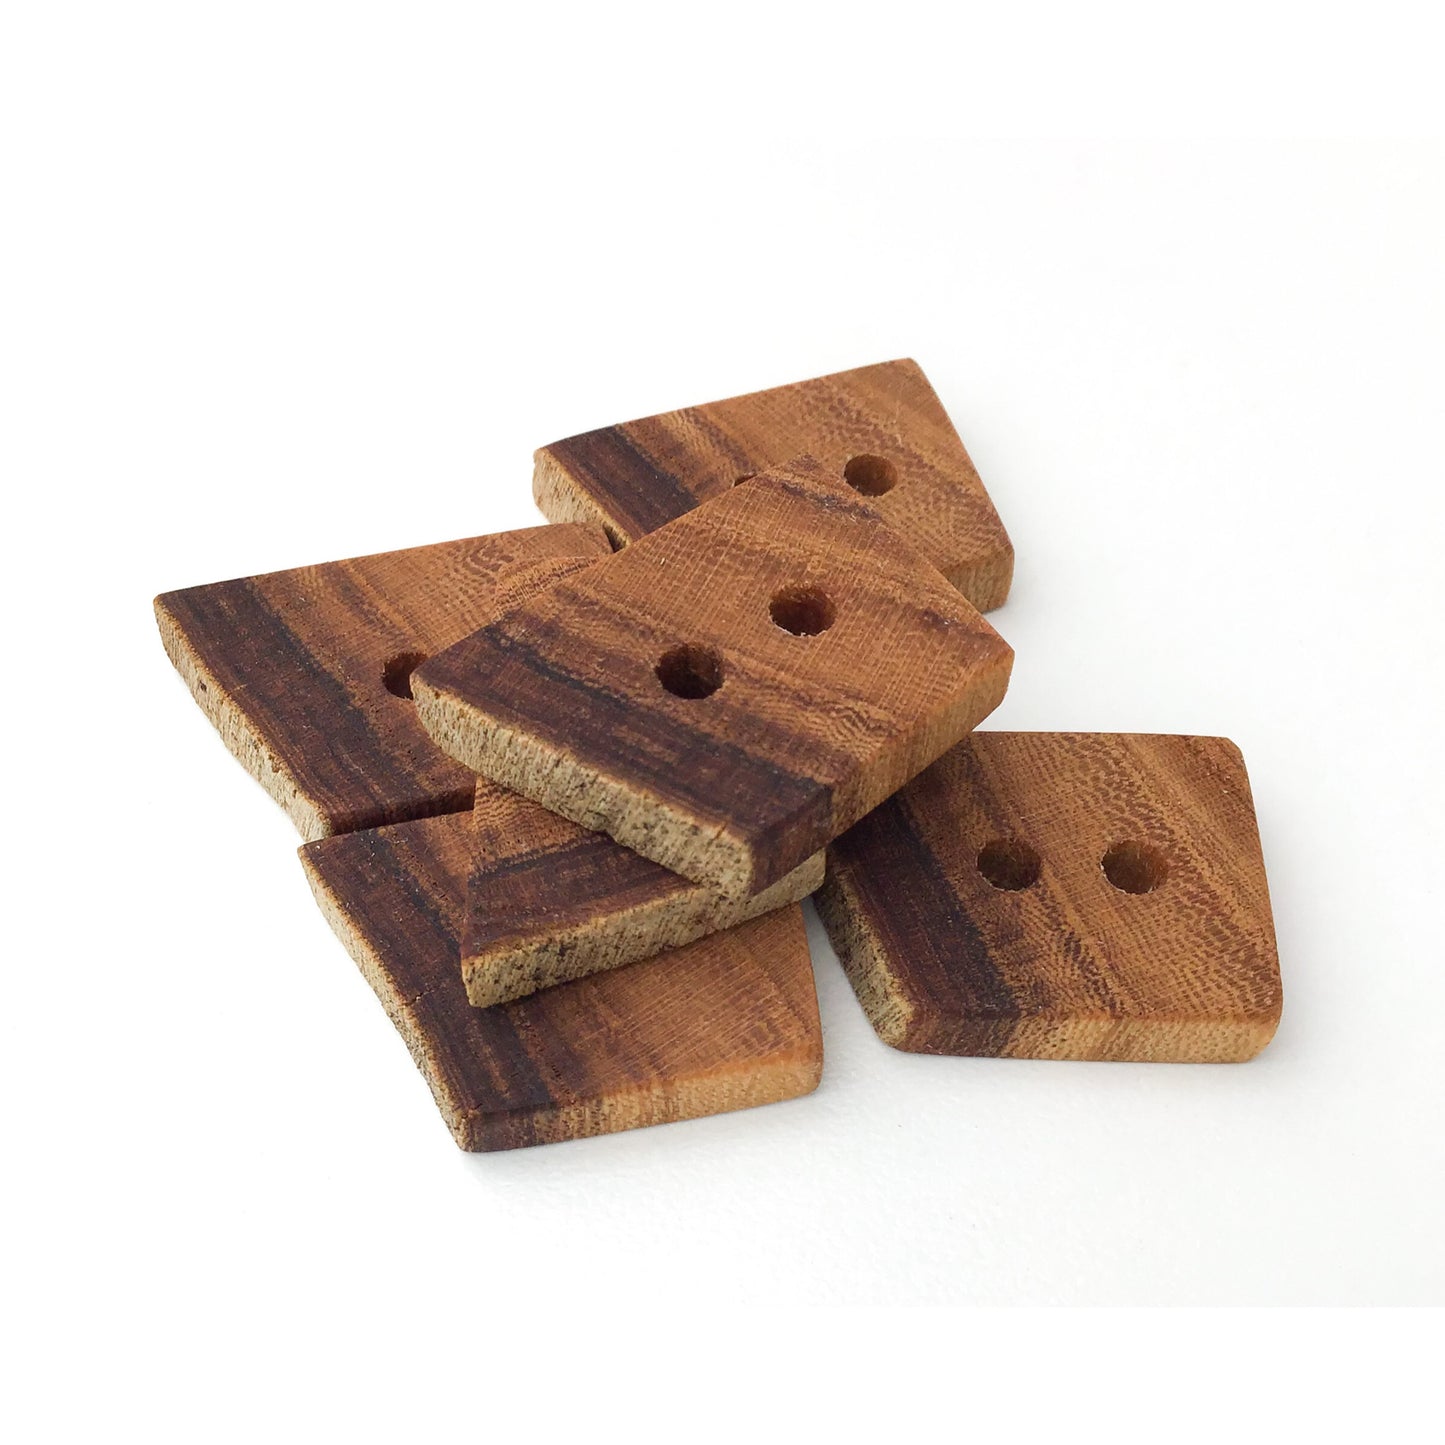 Rustic American Elm Wood Buttons - Live Edge American Elm Buttons -  5/8" x 7/8" - 6 Pack